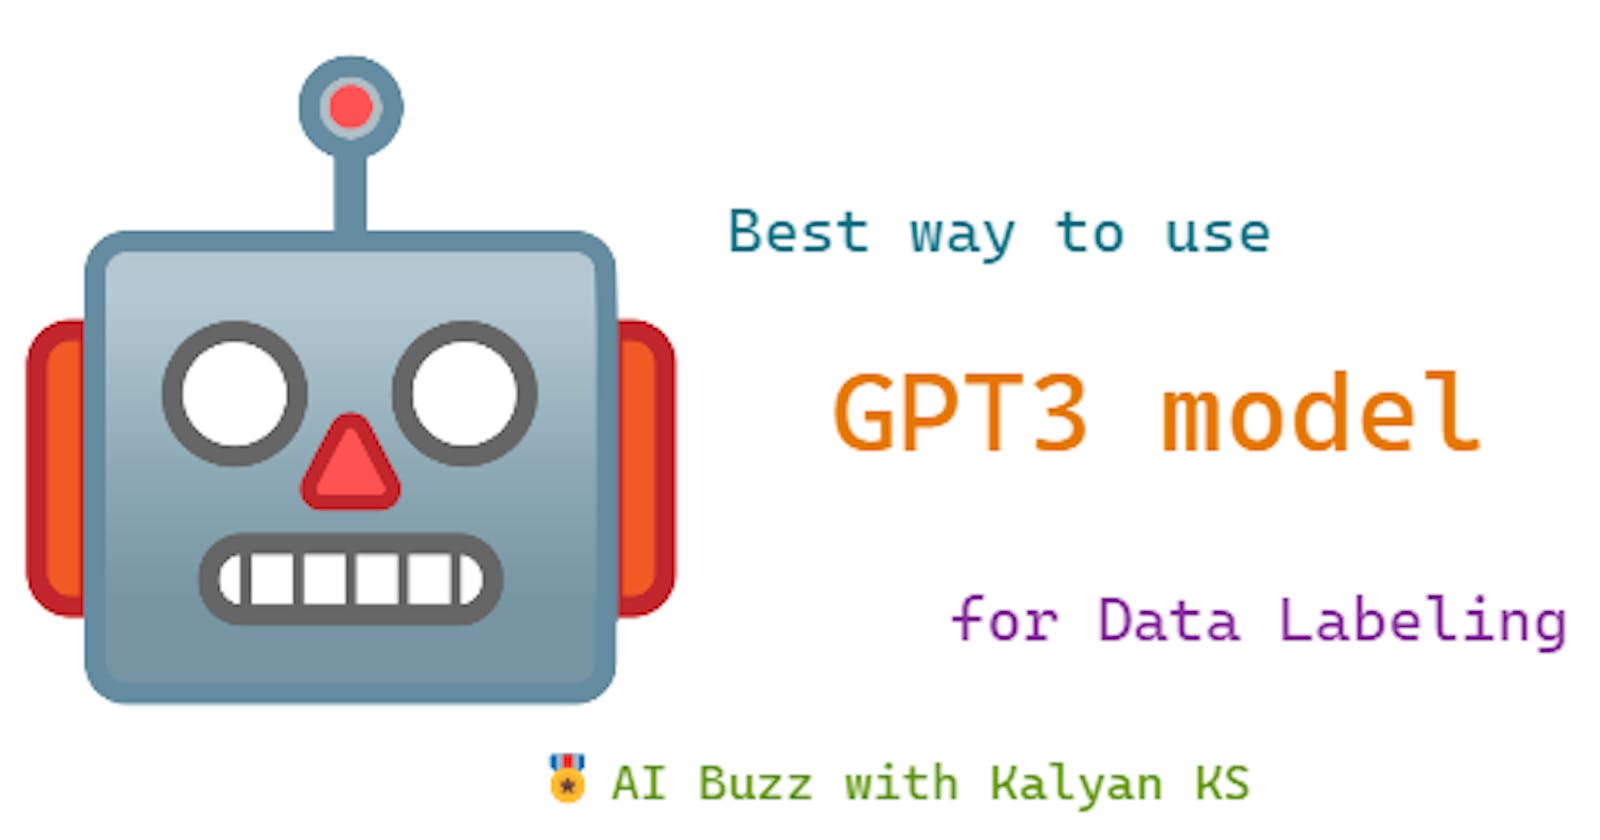 Exploring GPT3 - Best Way to Use GPT3 for Data Labeling (aka Data Annotation)